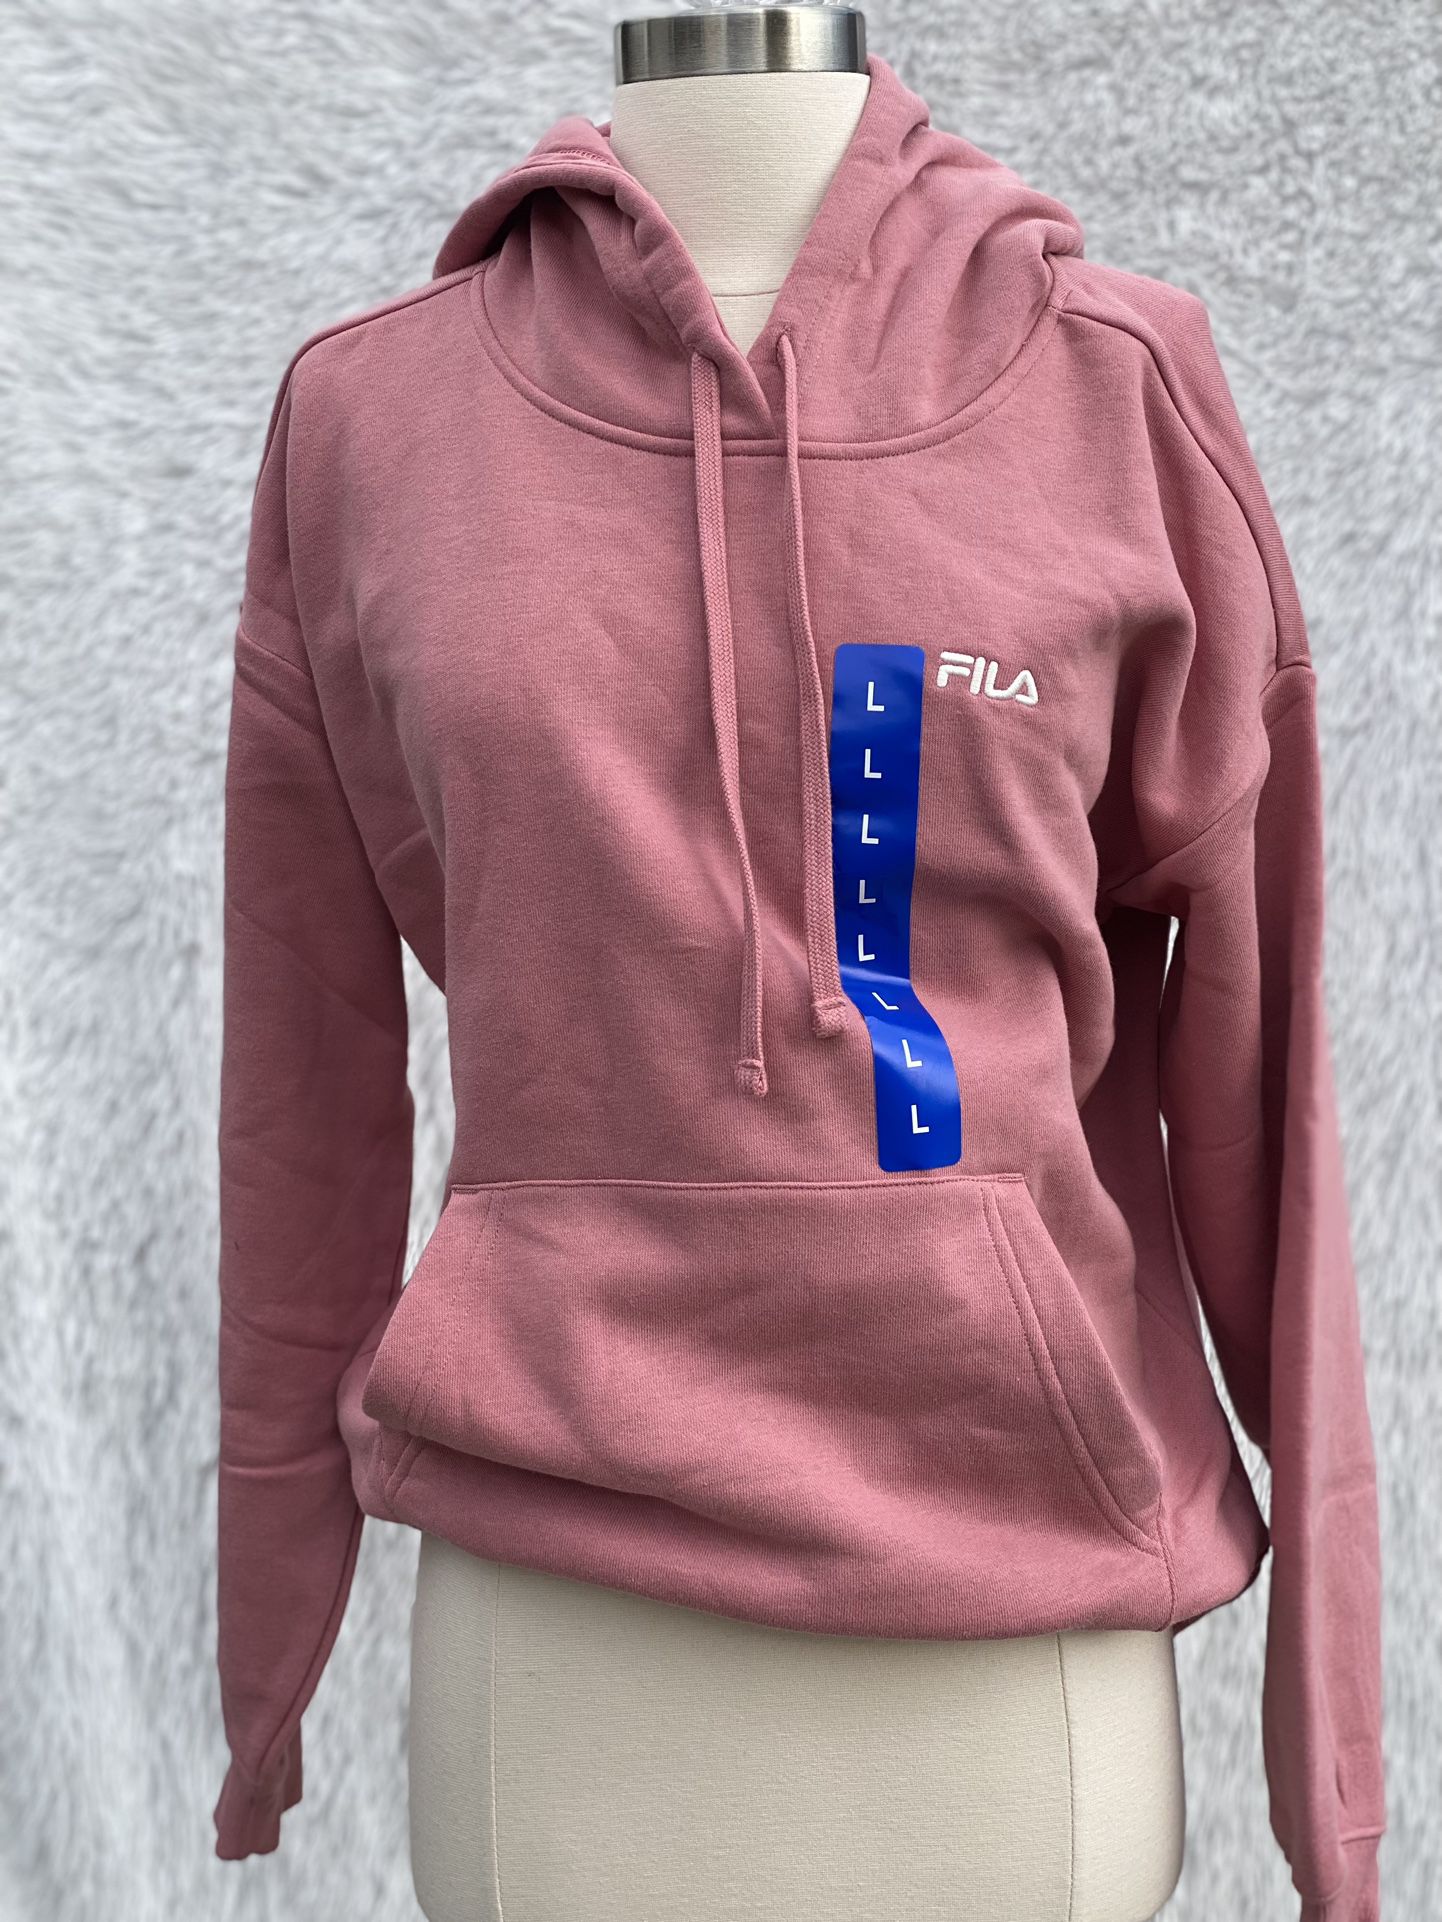 New- Pink Fila Hoodie Sweater Size Large